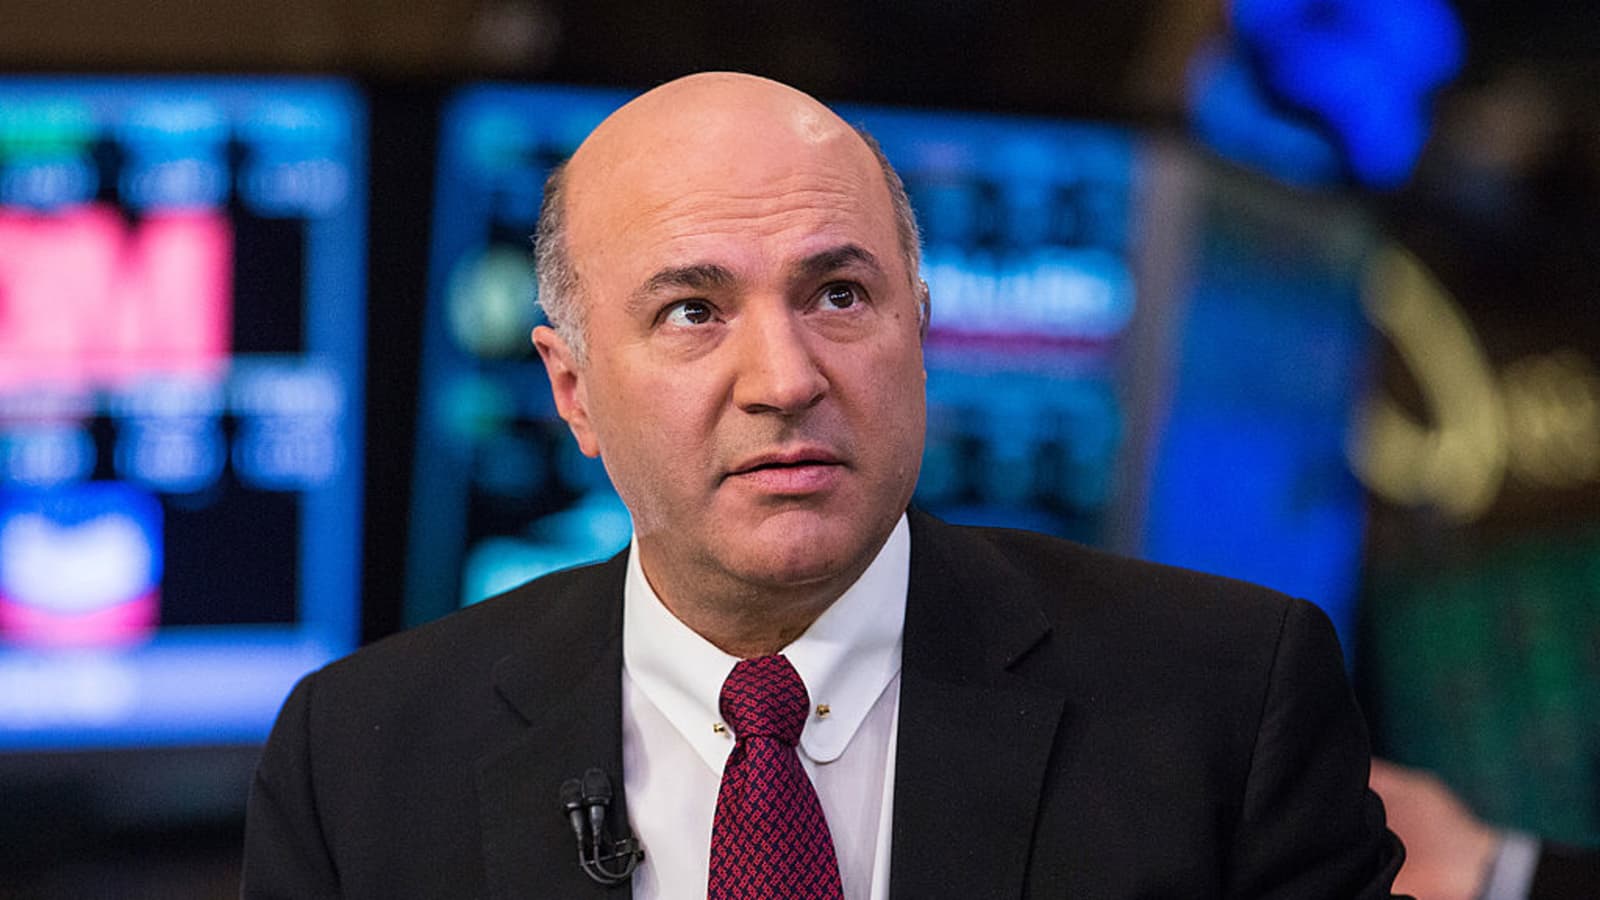 Kevin o leary buys bitcoin cryptocurrency bitcoin stock price